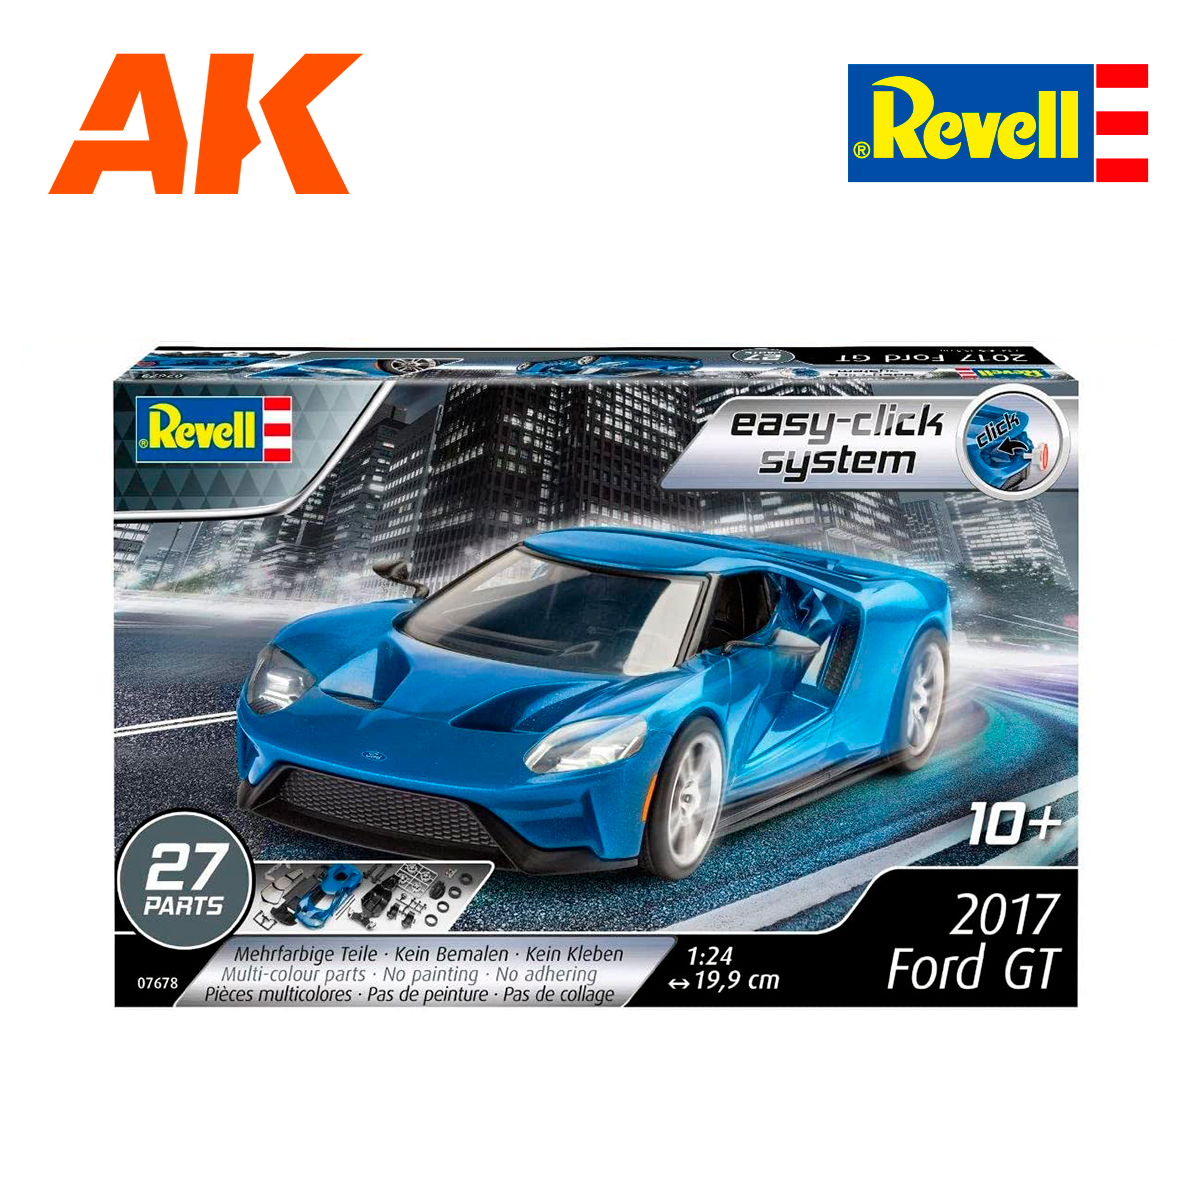 1/24 2017 Ford GT (Easy-Click System)